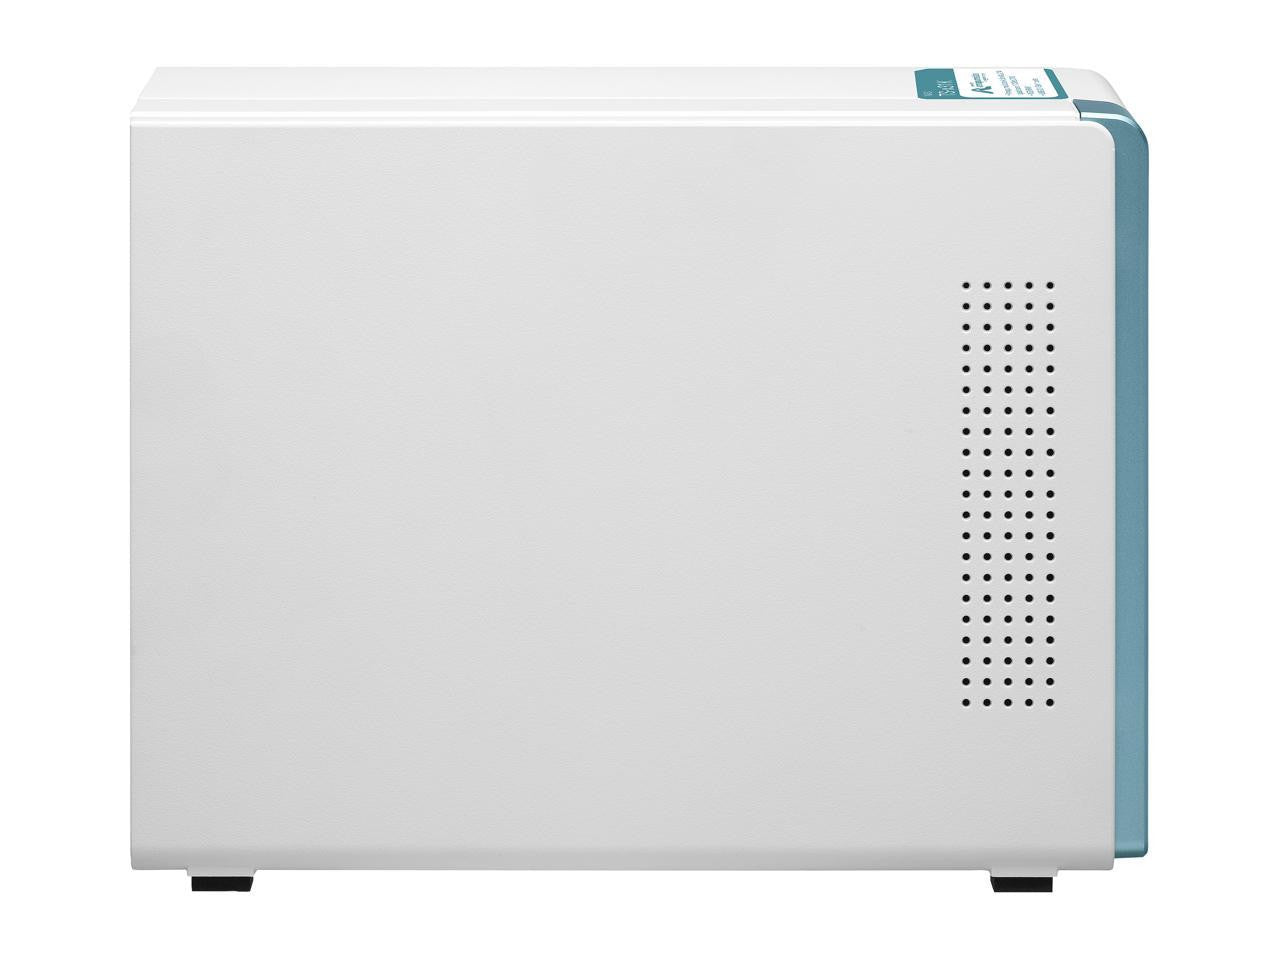 QNAP TS-231K 2-Bay Home NAS with 12TB (2 x 6TB) of Seagate Ironwolf NAS Drives Fully Assembled and Tested